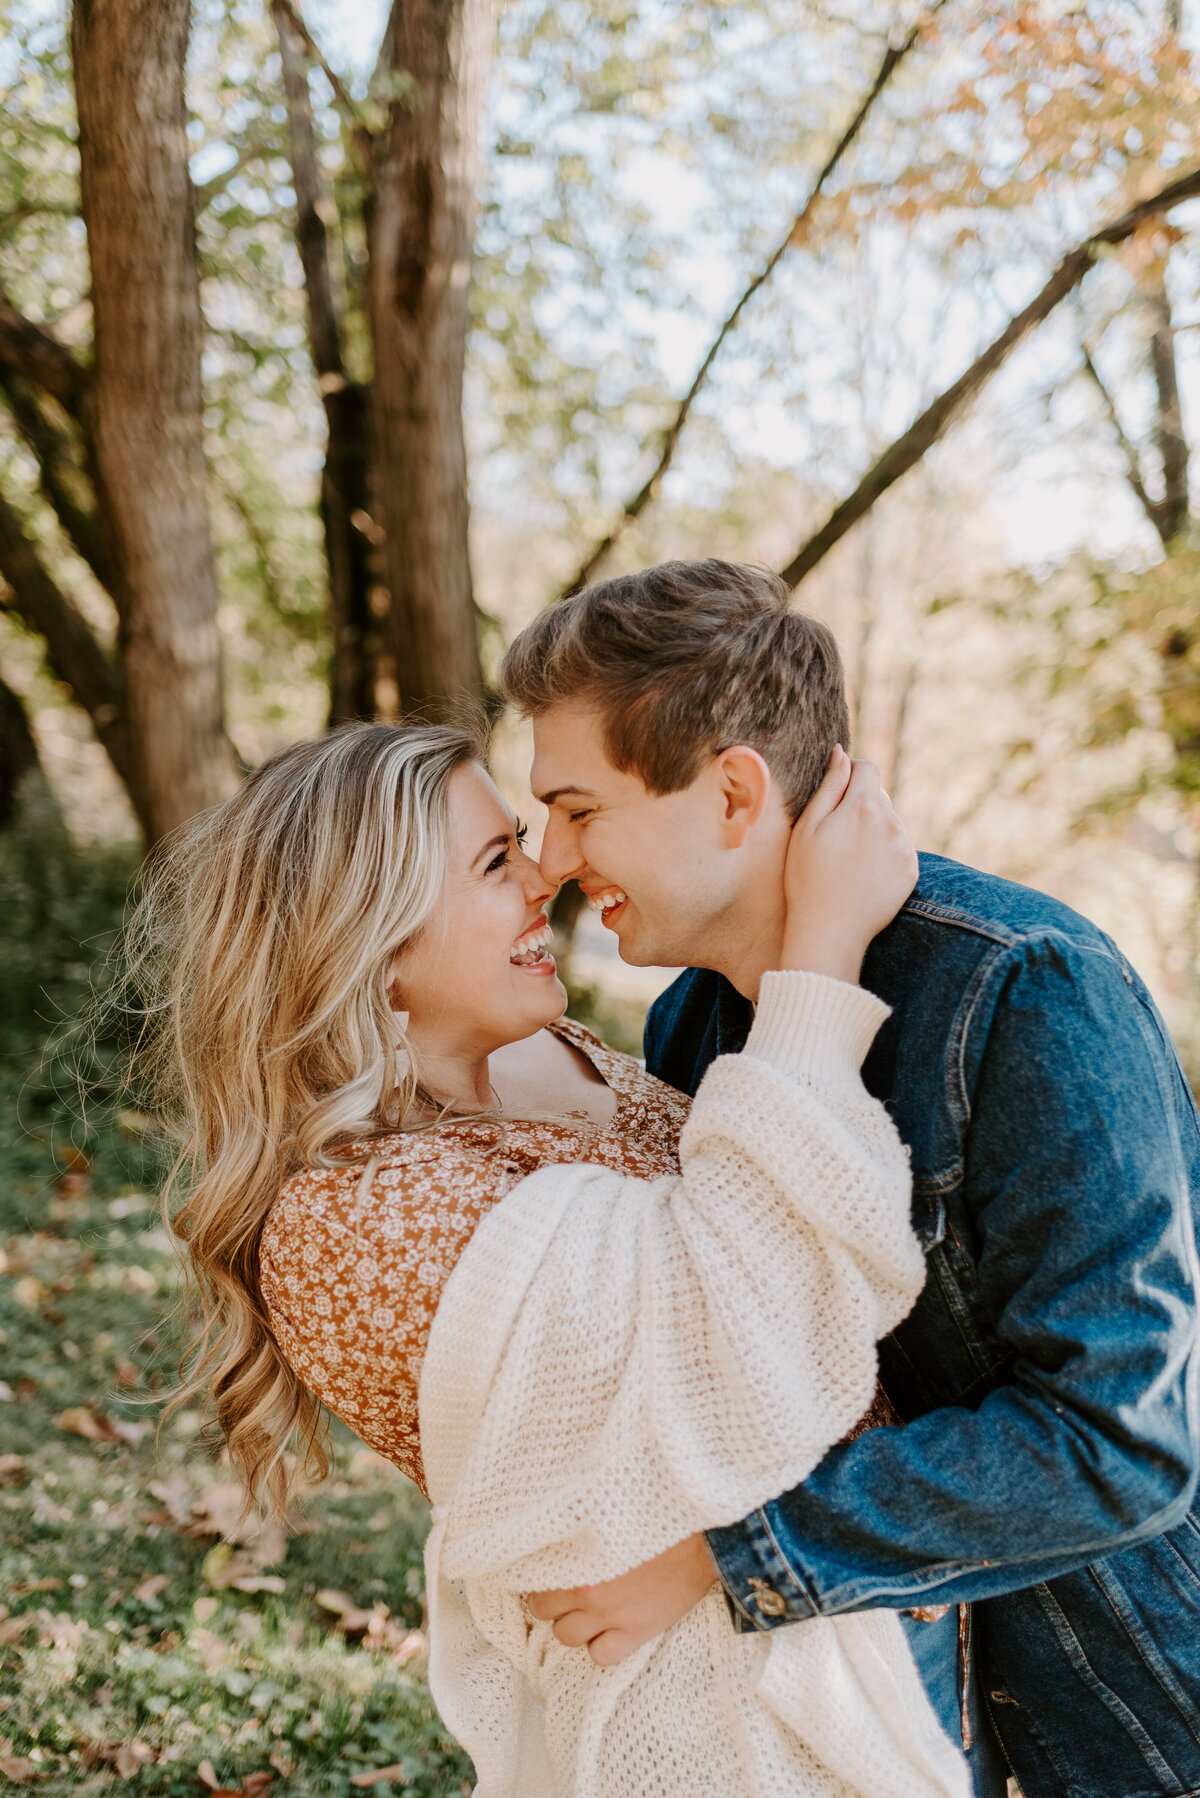 Louisvile-Kentucky-engagement-session-keely-nichole-photography-4